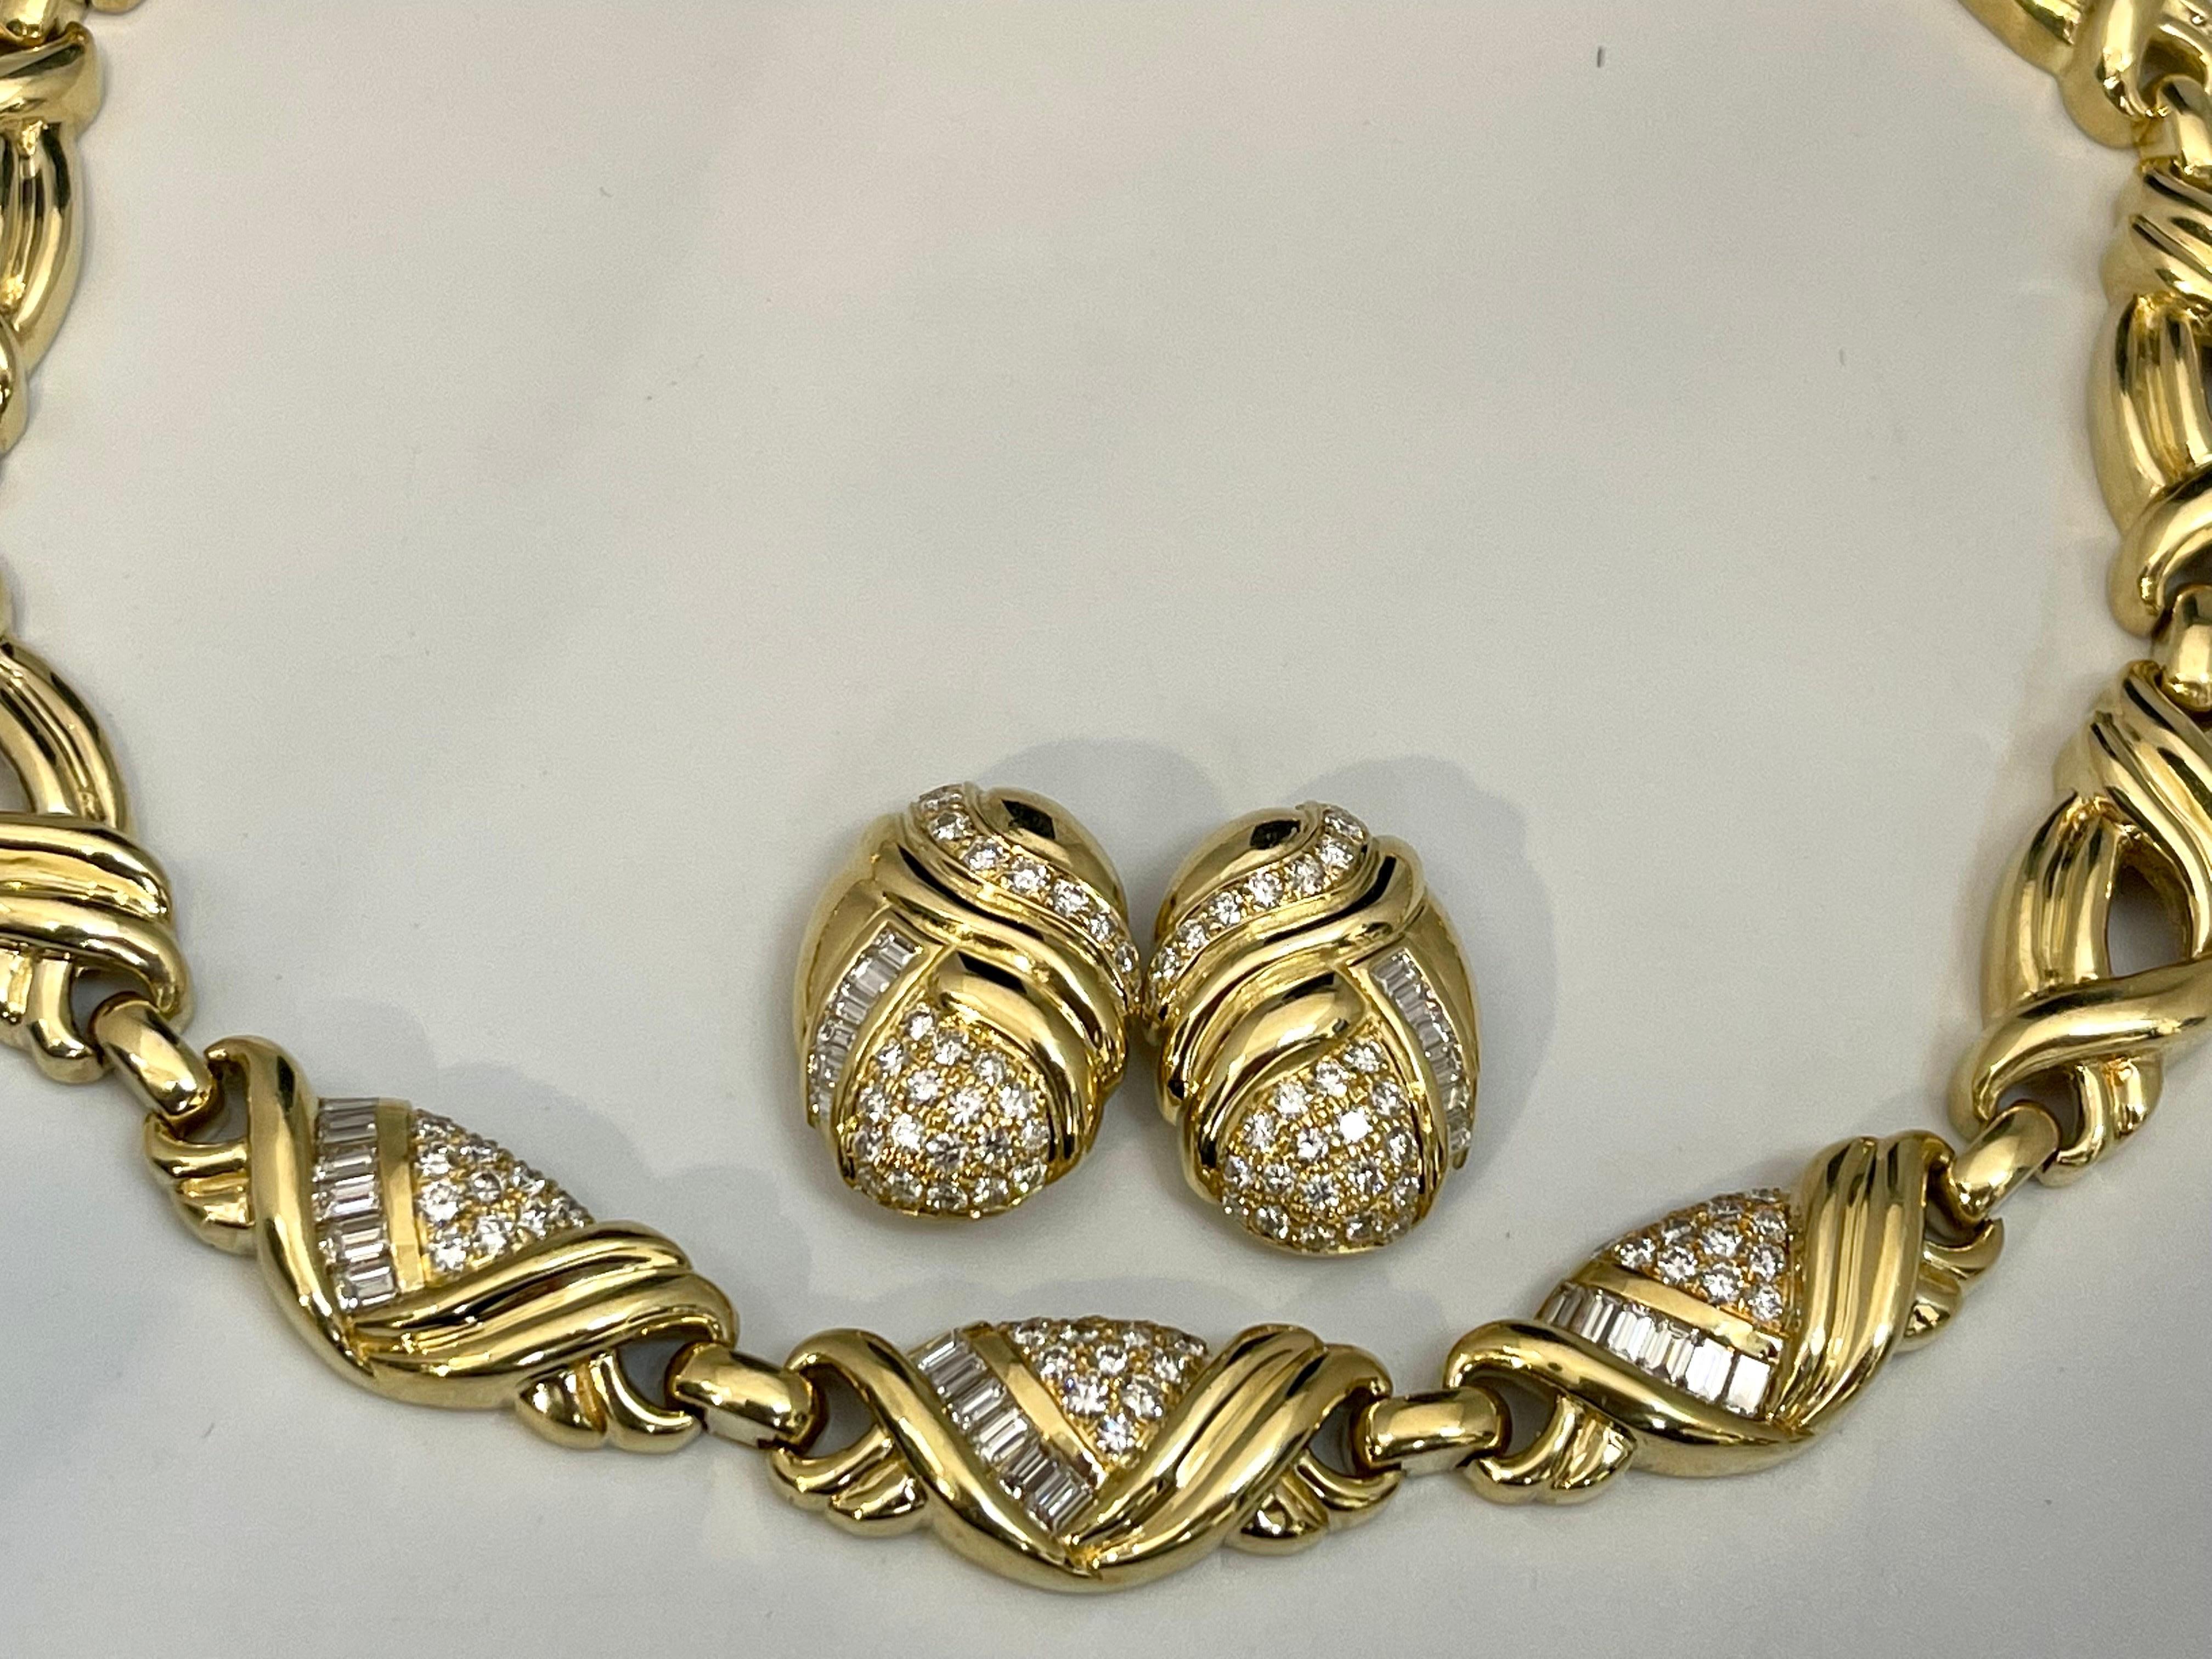 9 Carat Diamond Necklace & Earrings Bridal Suite 159 Gm 18 Karat Yellow Gold In Excellent Condition For Sale In New York, NY